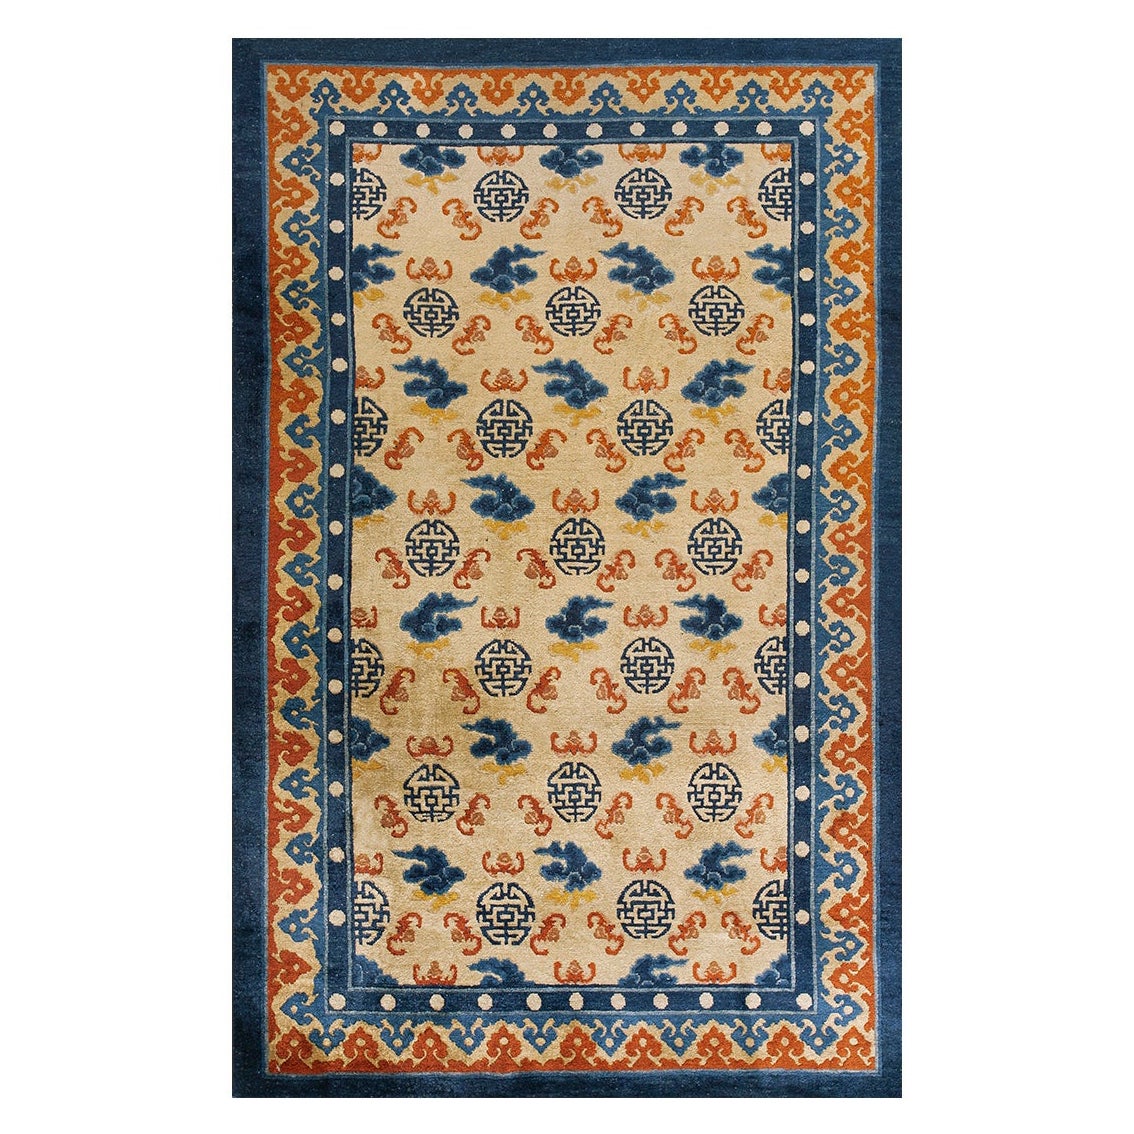 Late 19th Century W. Chinese Kansu Carpet ( 5'2" x 8' - 157 x 245 ) For Sale